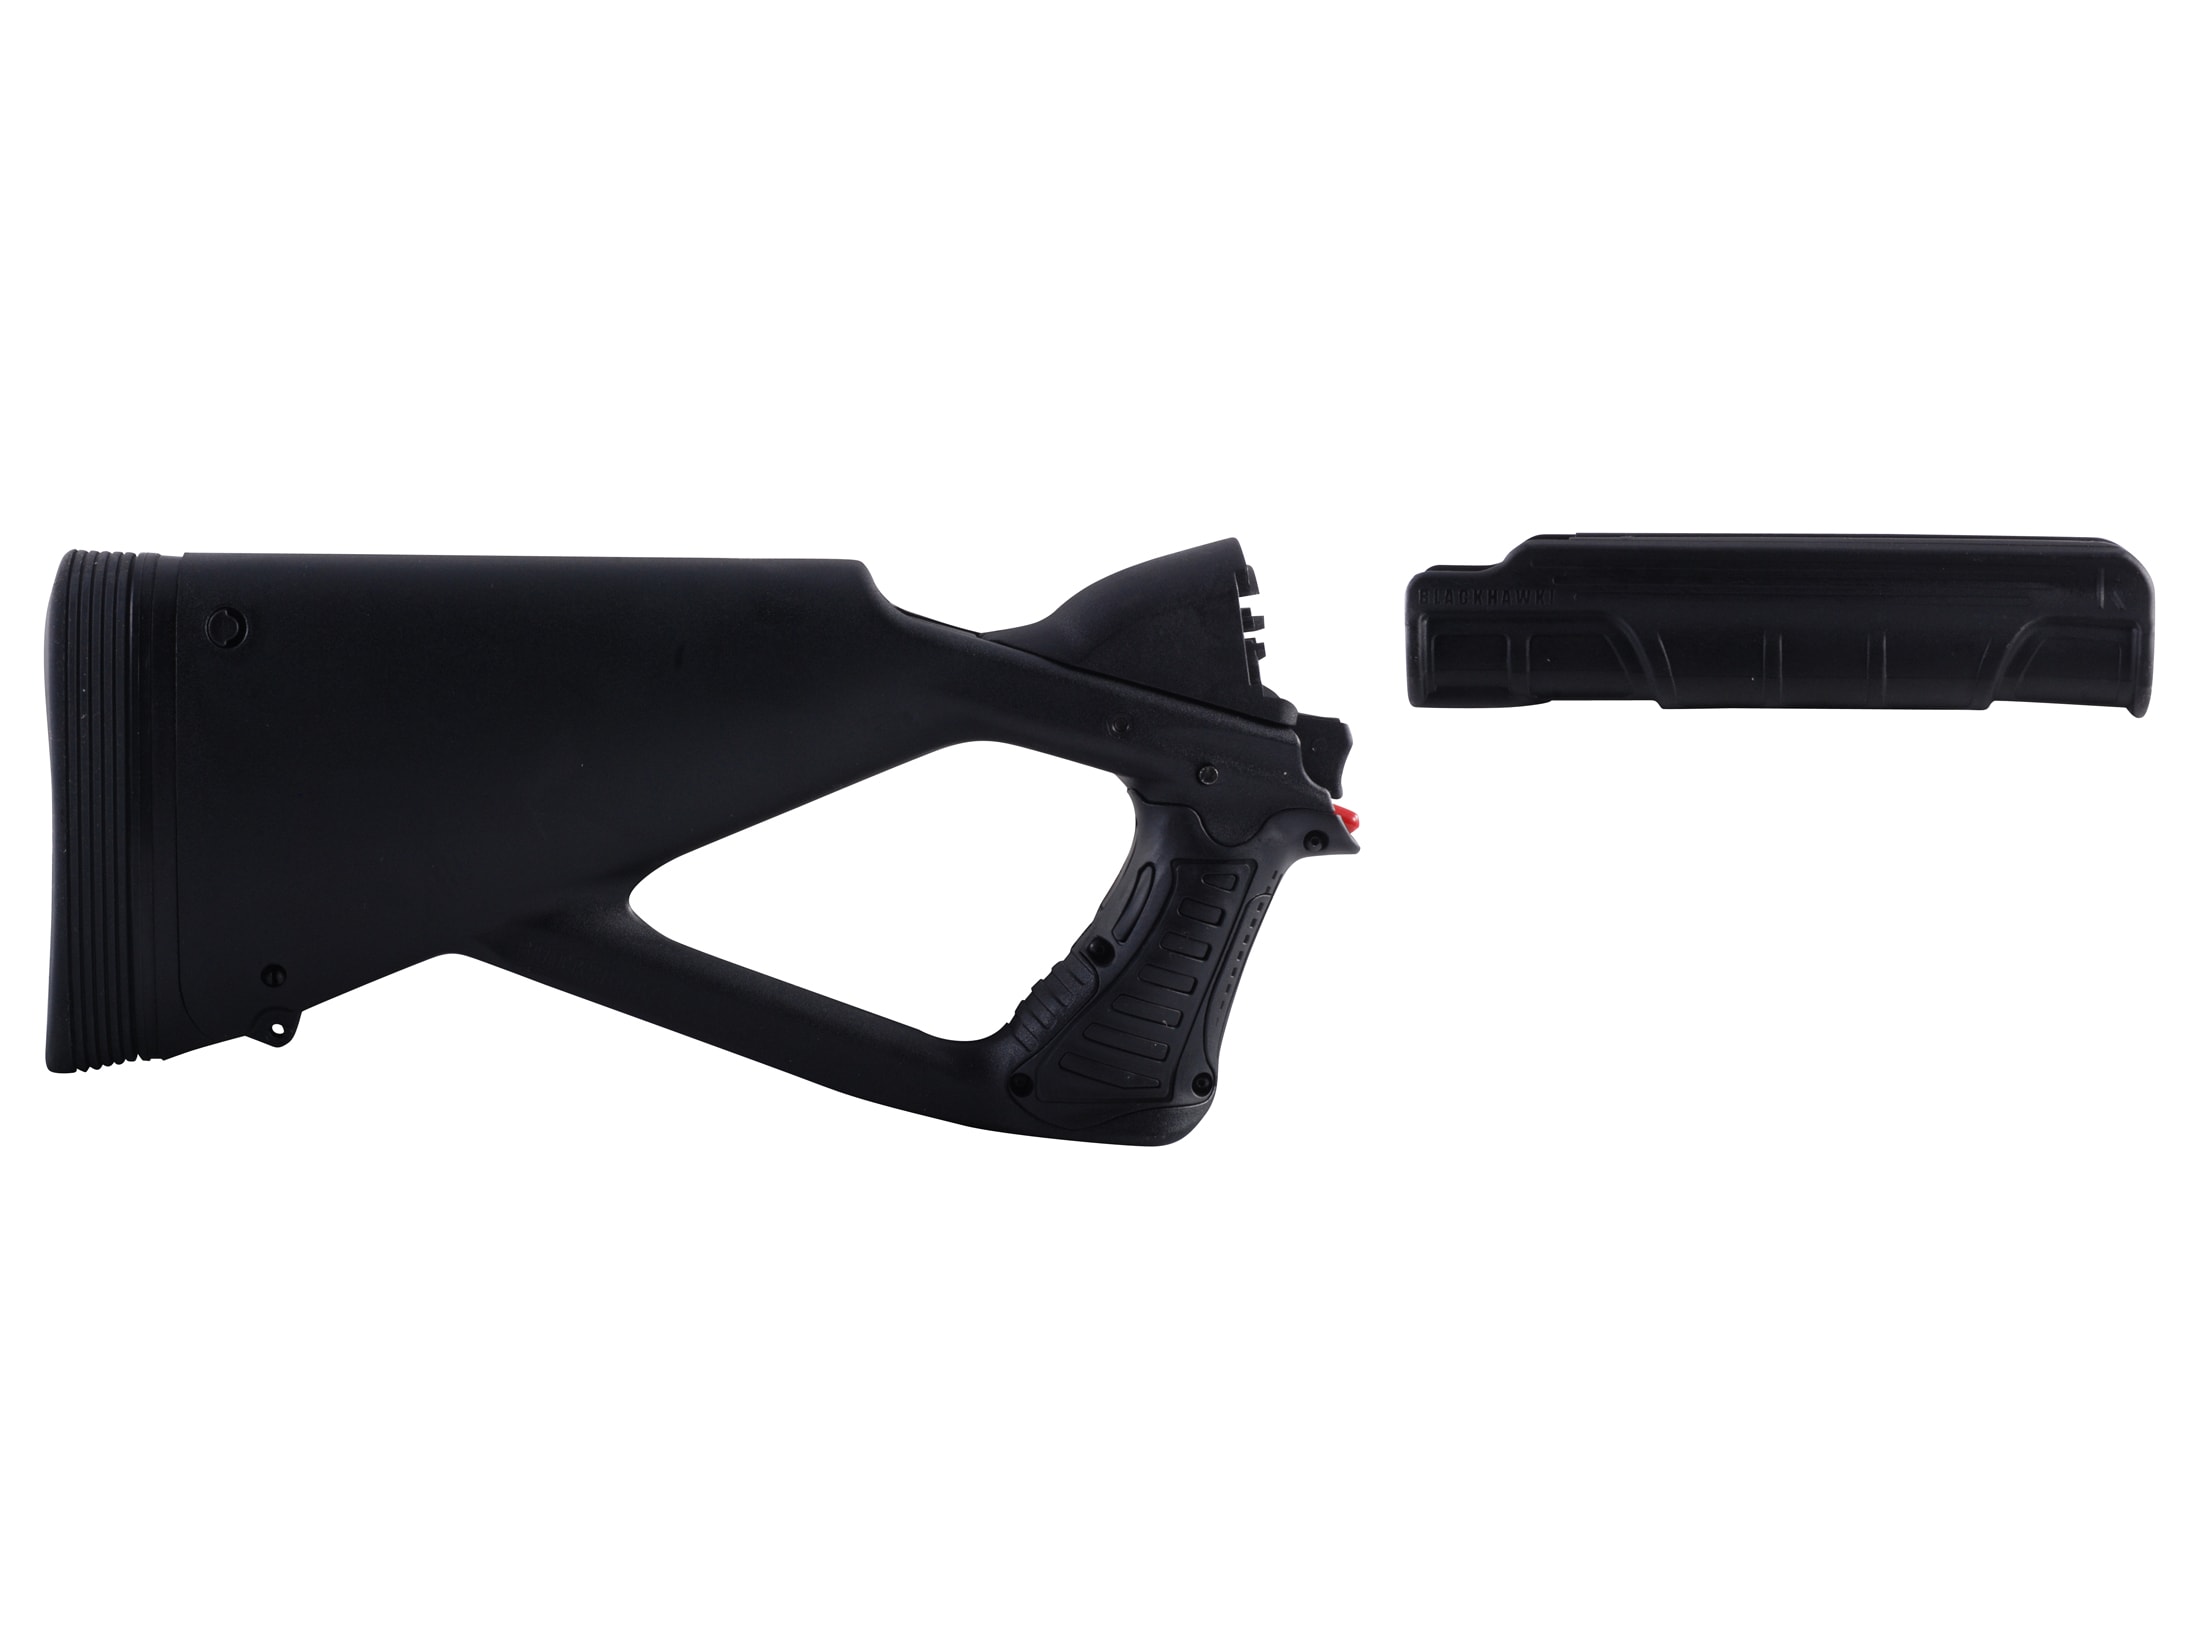 Thumbhole Stock and Forend Set combines the control of a pistol grip and er...